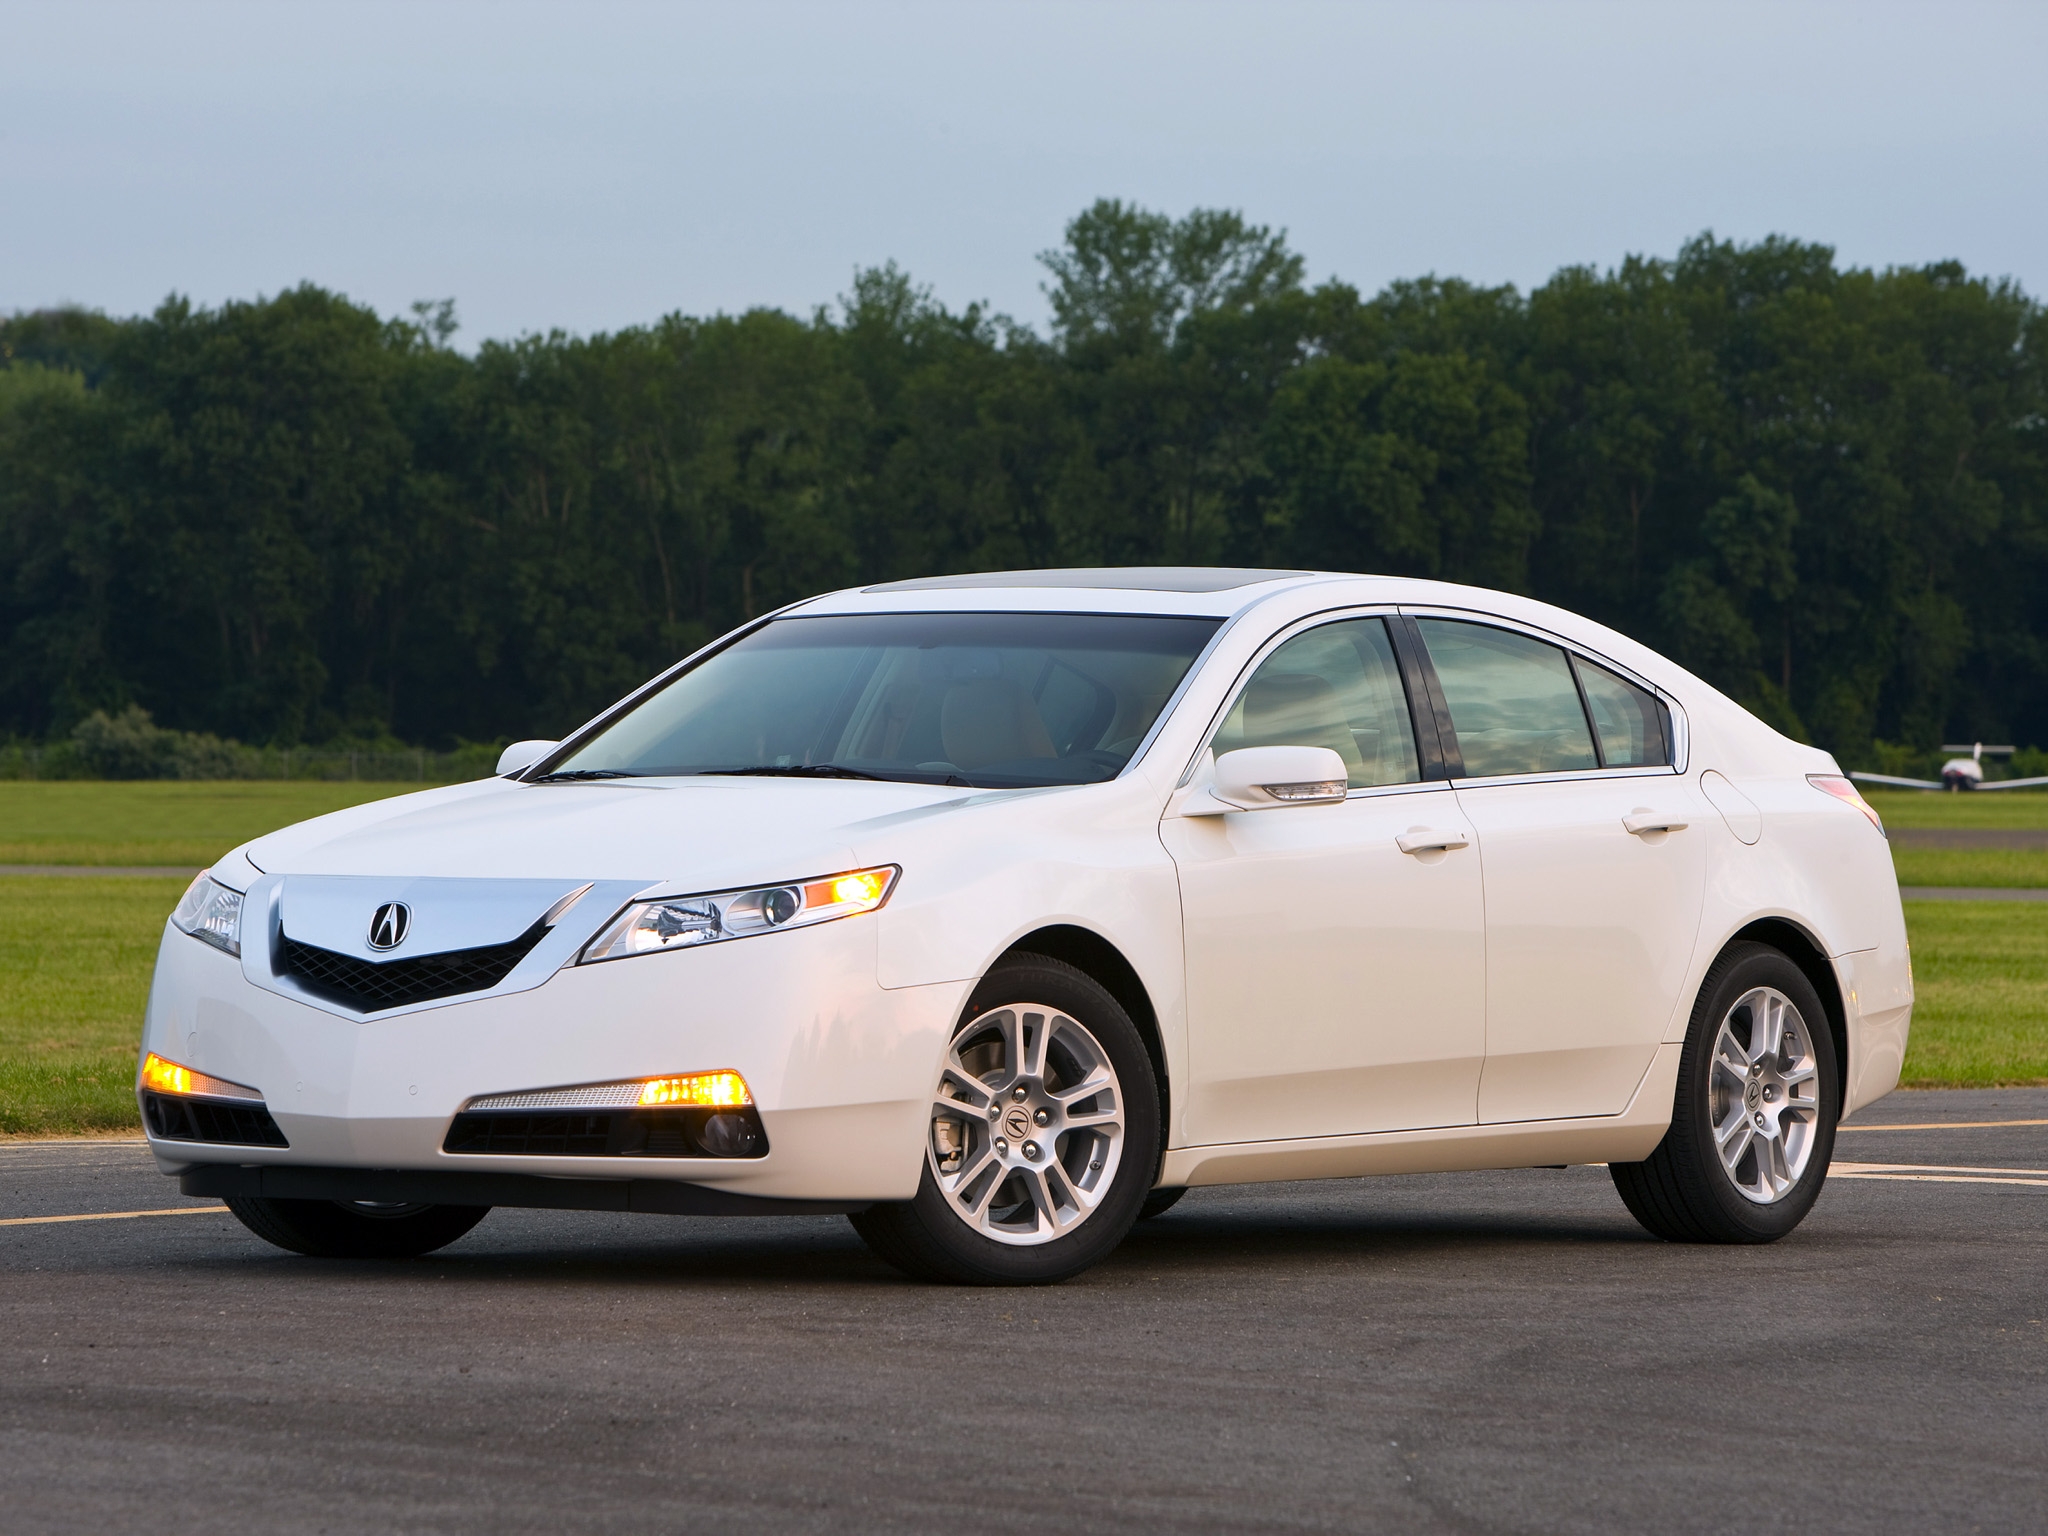 cars, auto, nature, trees, grass, acura, white, side view, style, akura, 2008, tl 4K Ultra